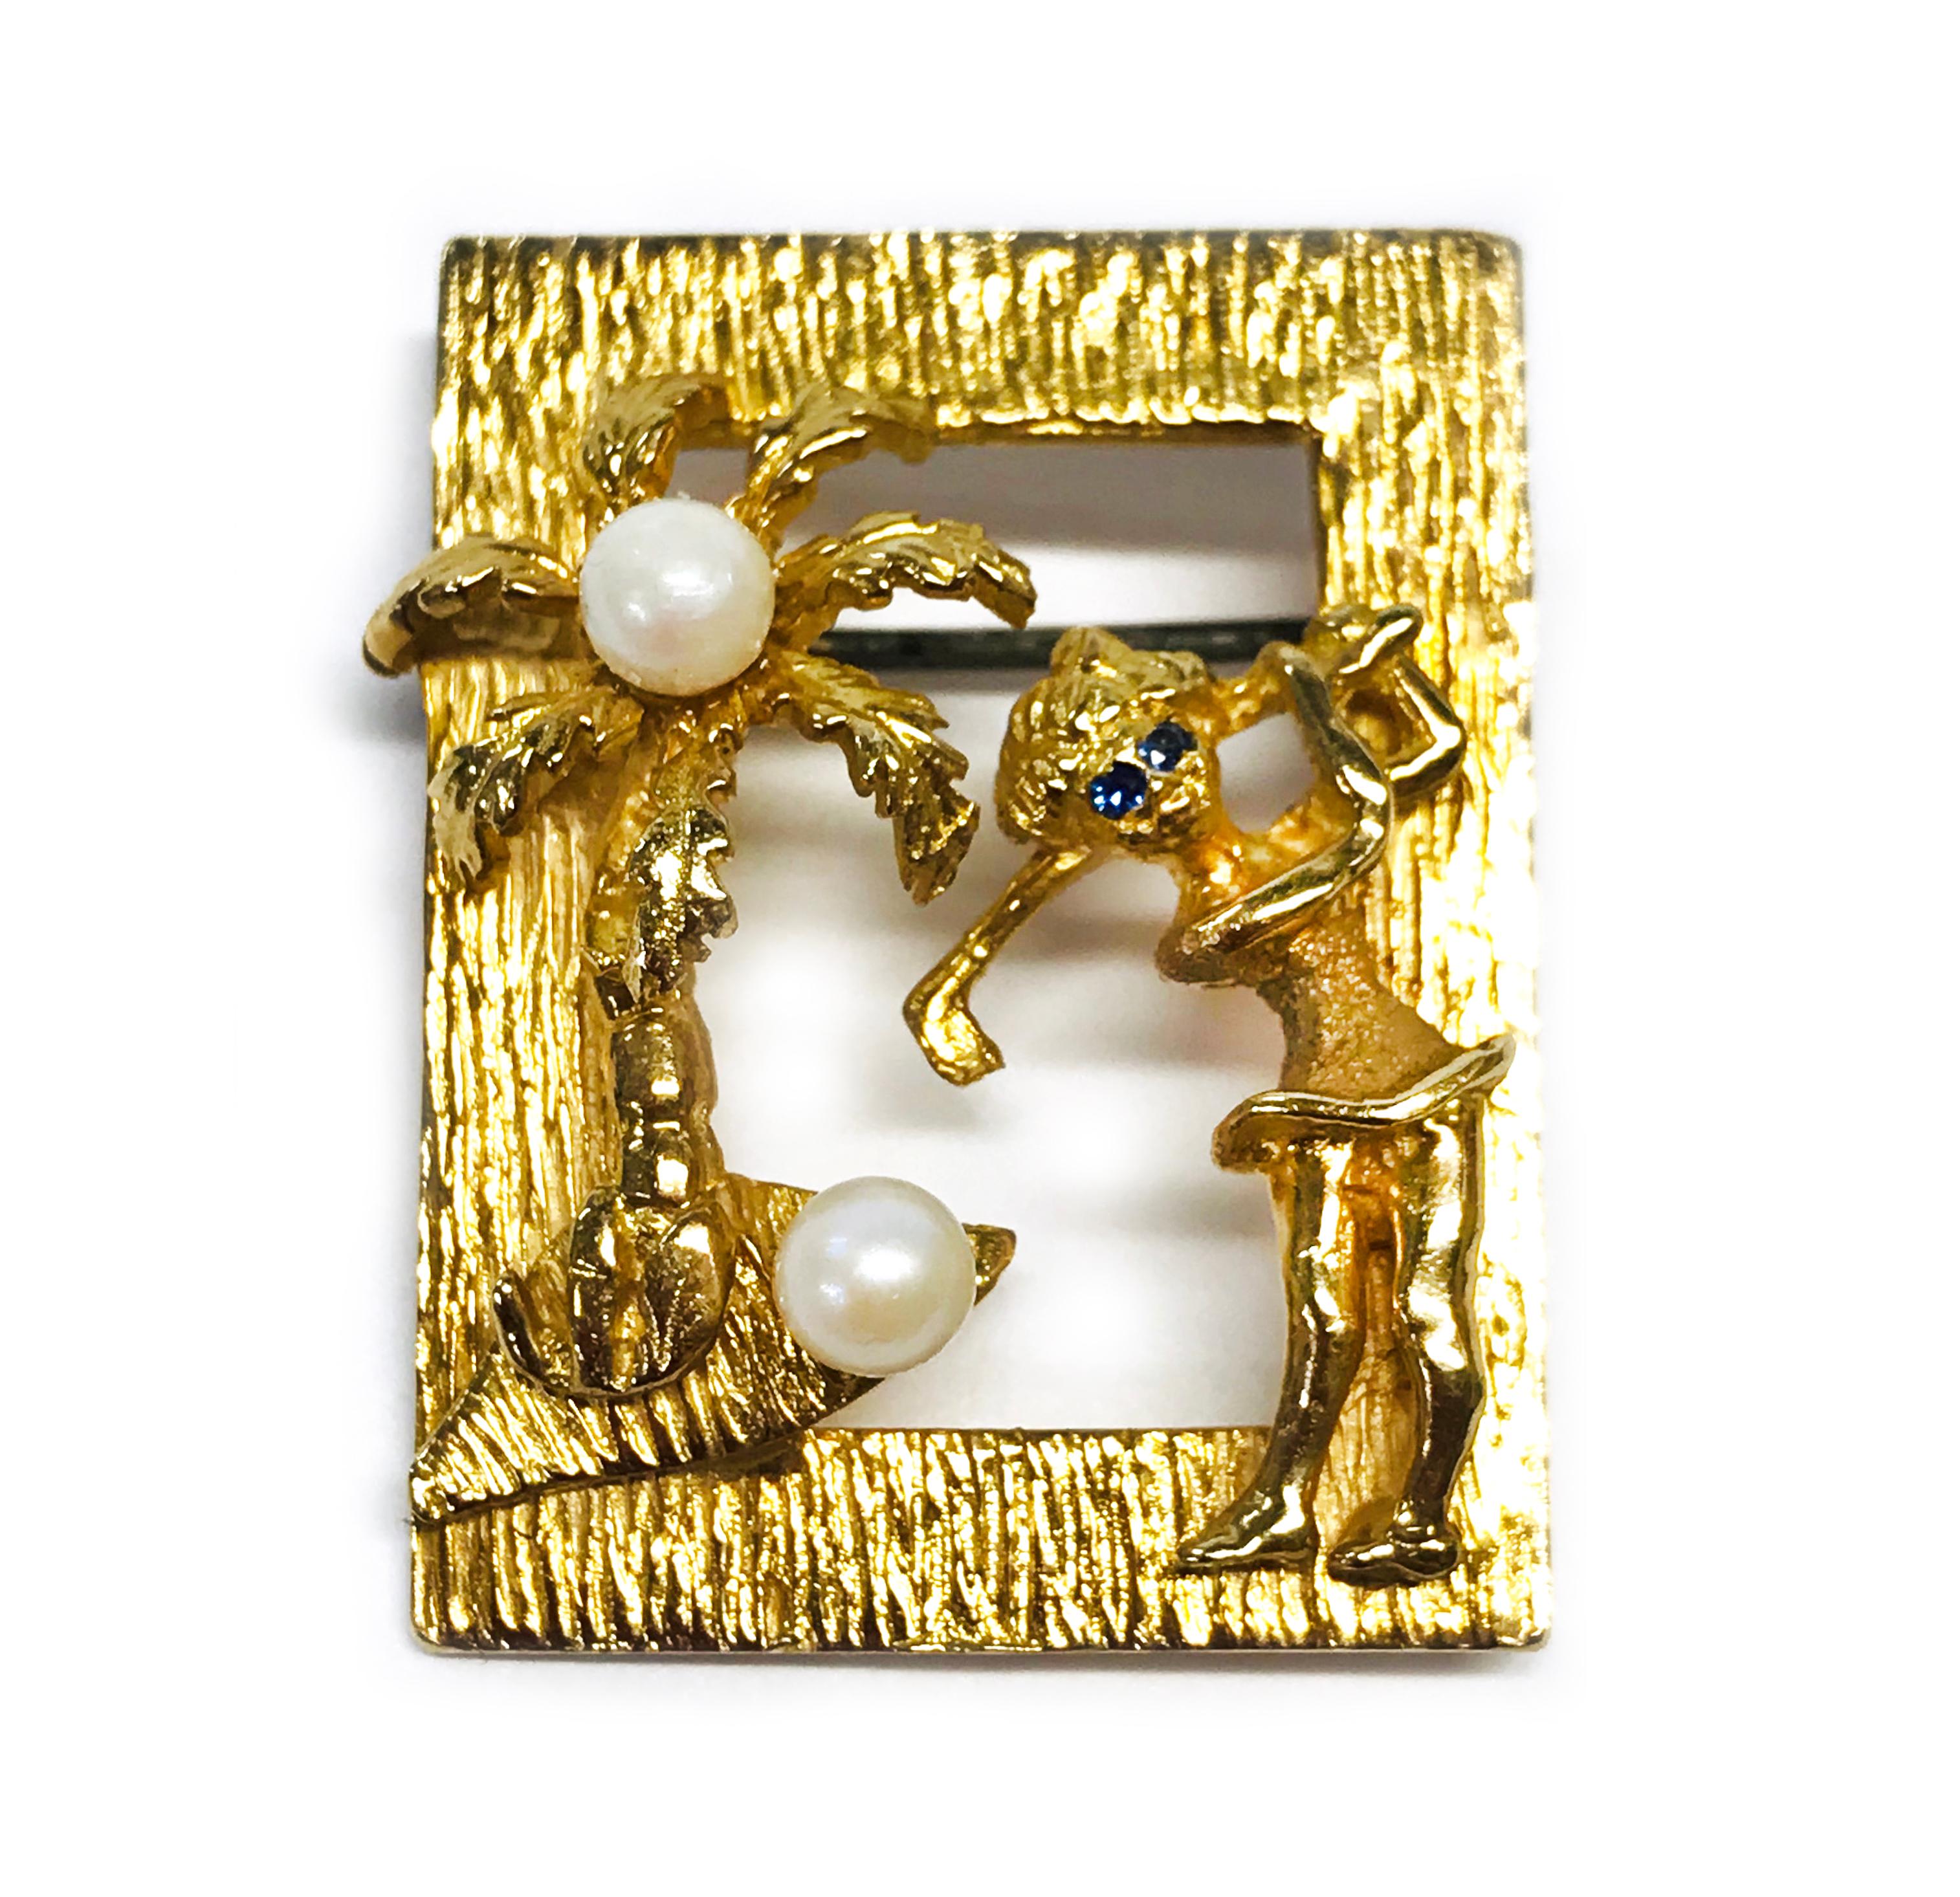 14 Karat Pearl Sapphire Golfer Brooch/Pin. A palm tree and a lady golfer are set on a gold frame with two 4mm Pearls and blue Sapphires for the golfer eyes. Stamped on the back is 14K CJS. The brooch/pin has a gold weight of 9.3 grams. 